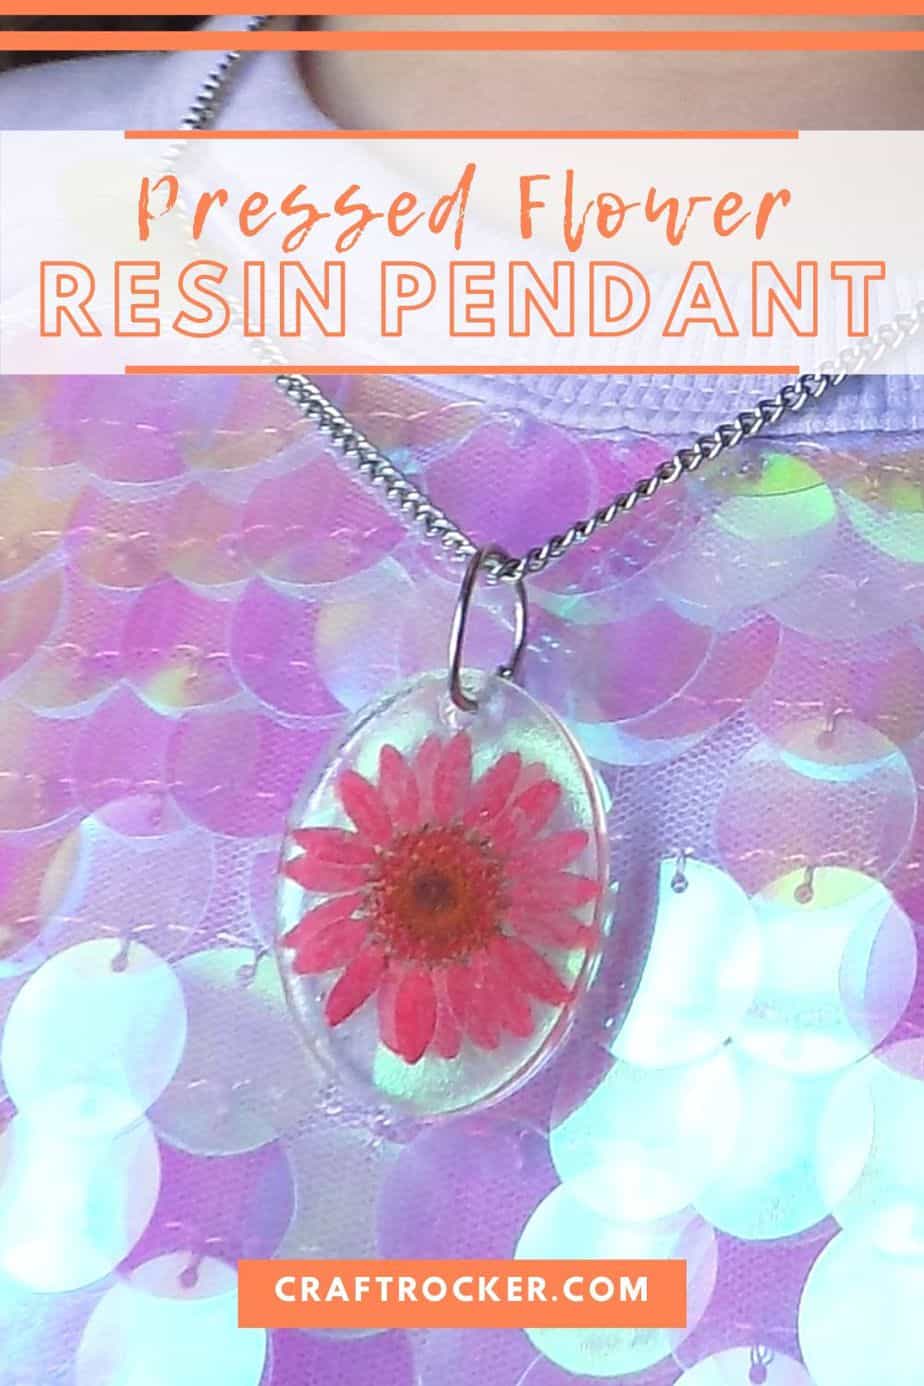 Pressed Flower Pendant with text overlay - Pressed Flower Resin Pendant - Craft Rocker